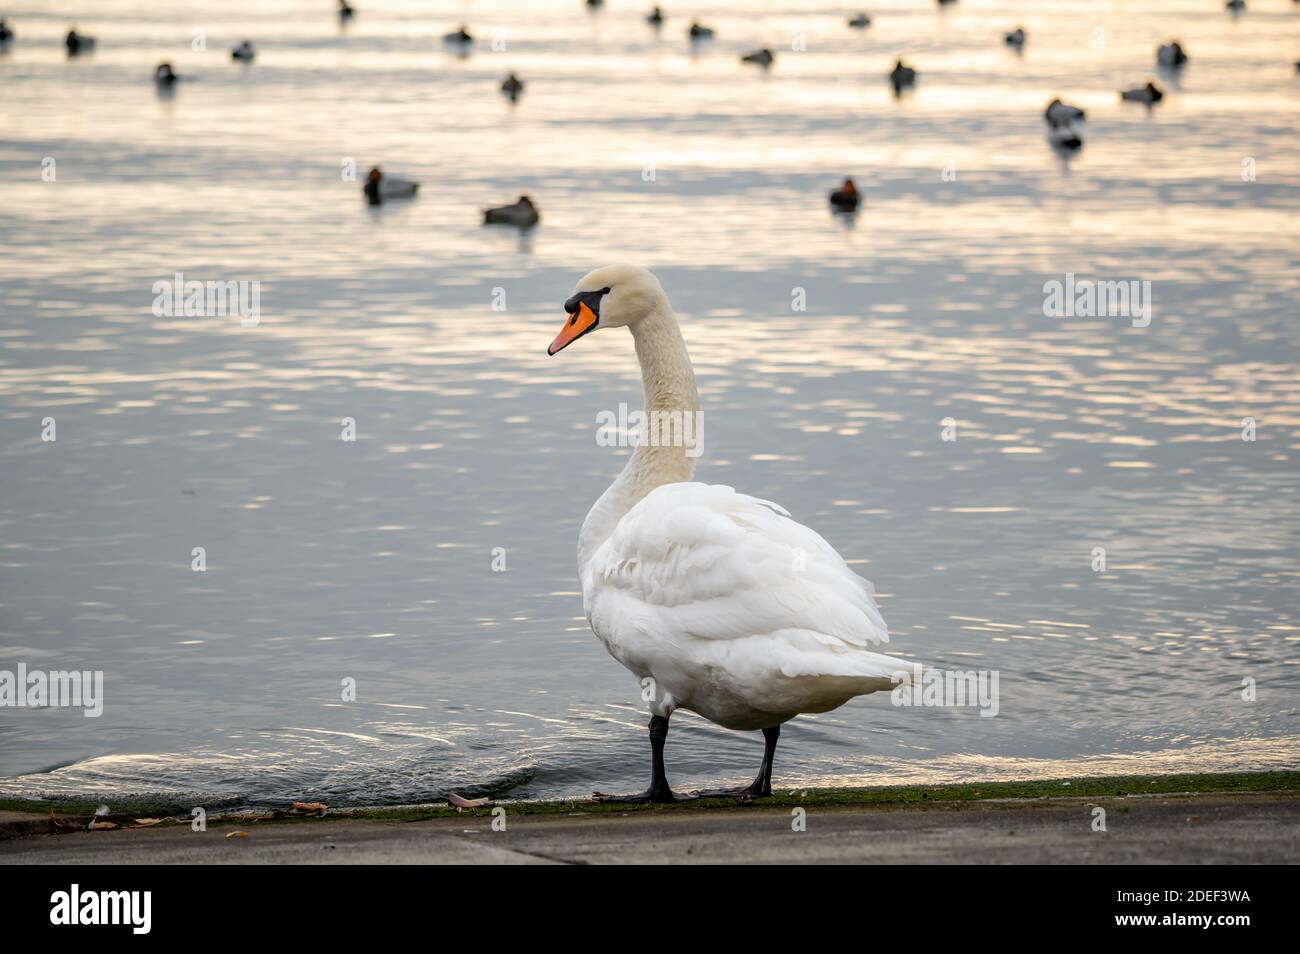 One mute swan cleaning feathers beside water at sunset. Cygnus olor. Backgrounds of flock water birds. Beauty in nature. Lausanne, Switzerland. Stock Photo